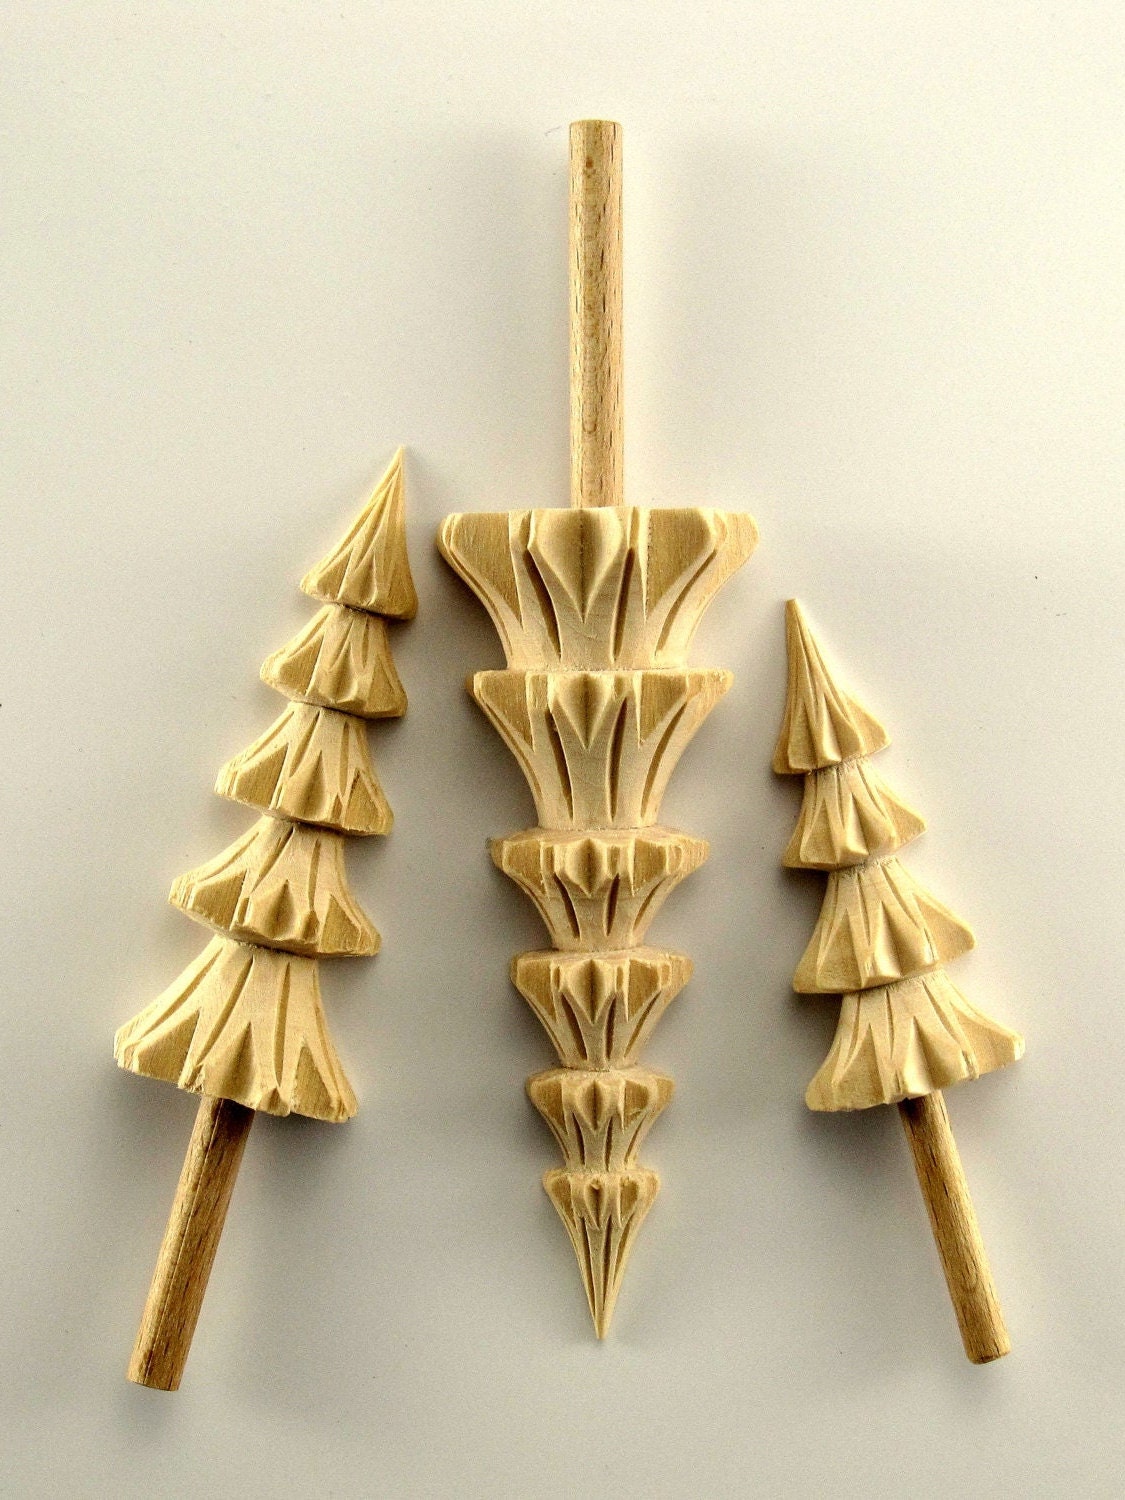 Set of three unfinished pine trees wooden crafts to paint 